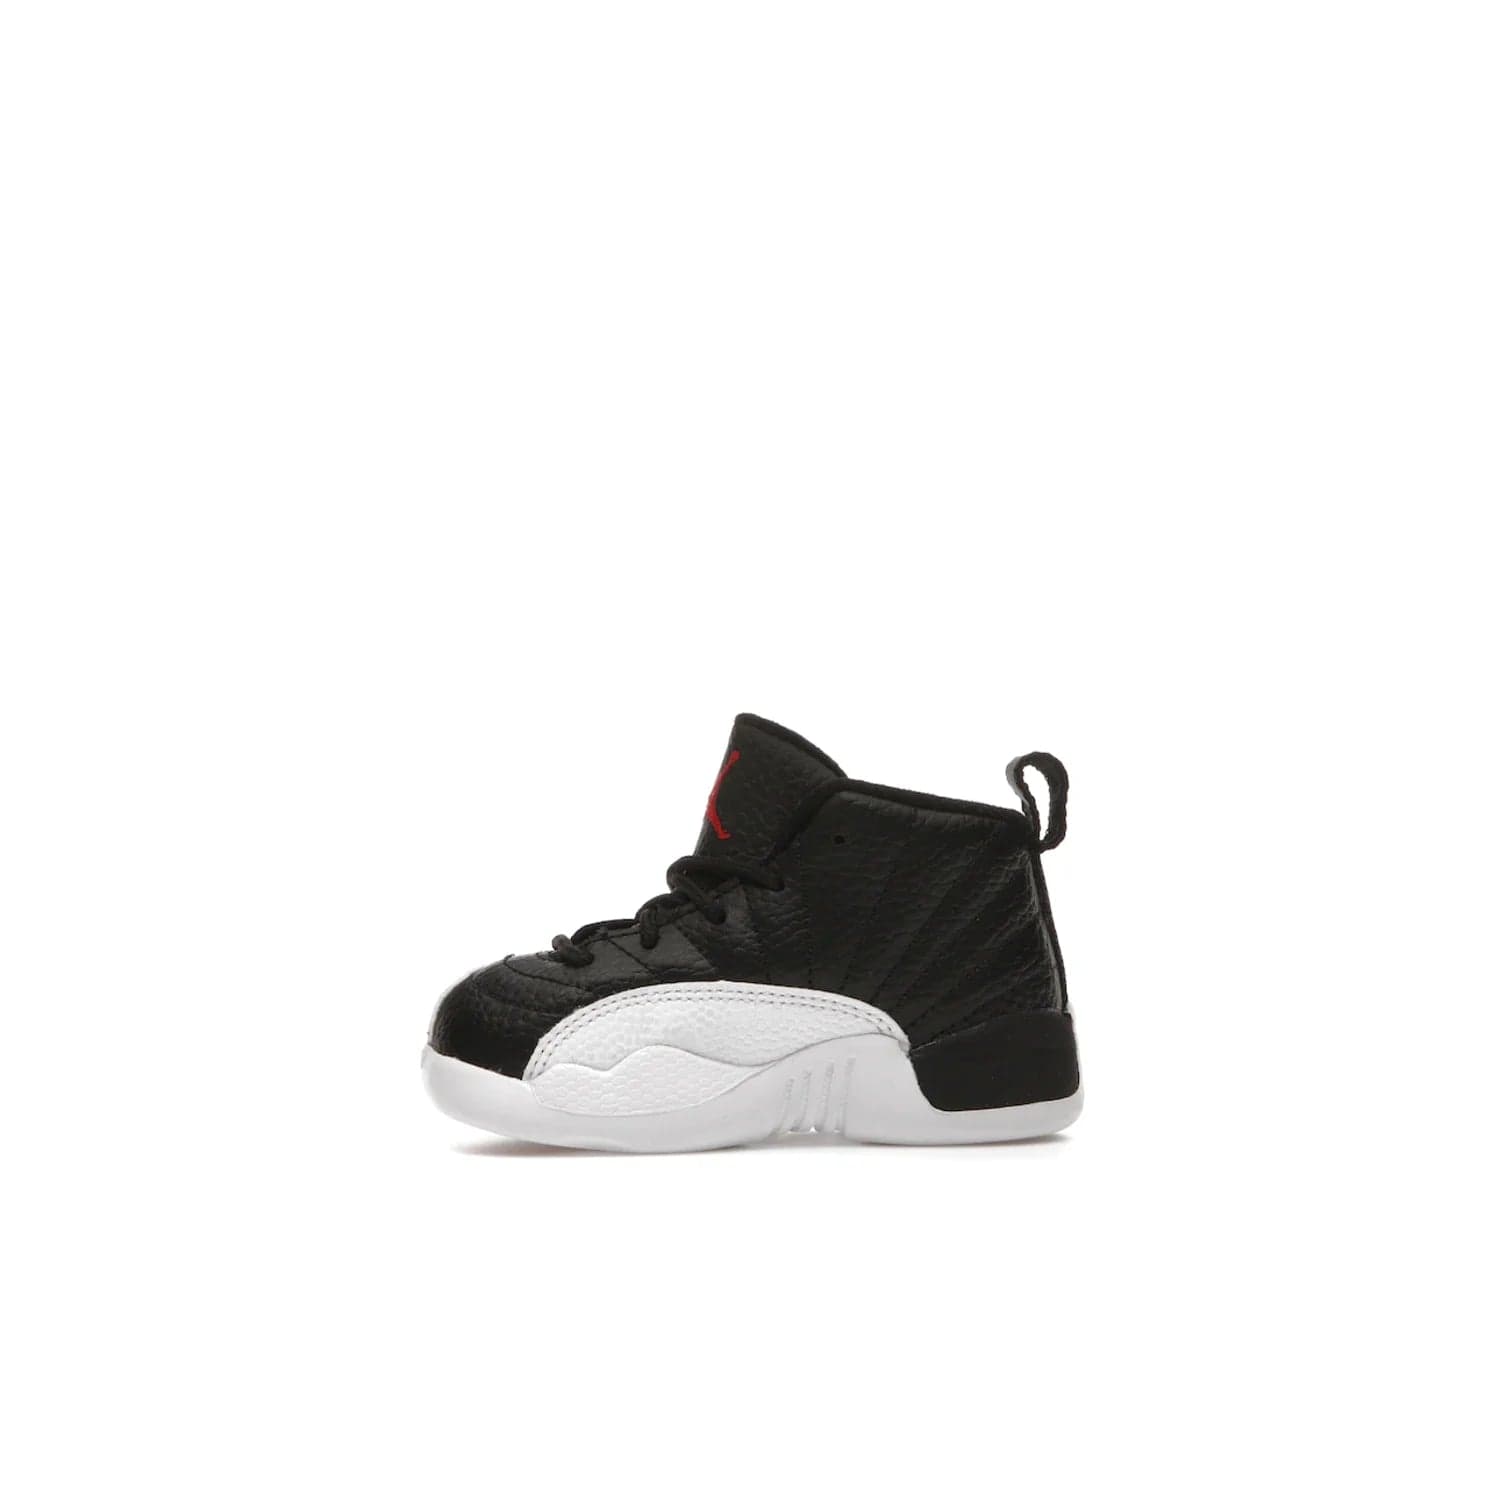 Jordan 12 Retro Playoffs (2022) (TD) - Image 18 - Only at www.BallersClubKickz.com - Stay stylish with the Air Jordan 12 Retro Playoffs 2022 (TD) toddler shoe. All-black upper with red and white accents plus subtle gold details. Bright white midsole and sole. Perfect for any outing or special event.